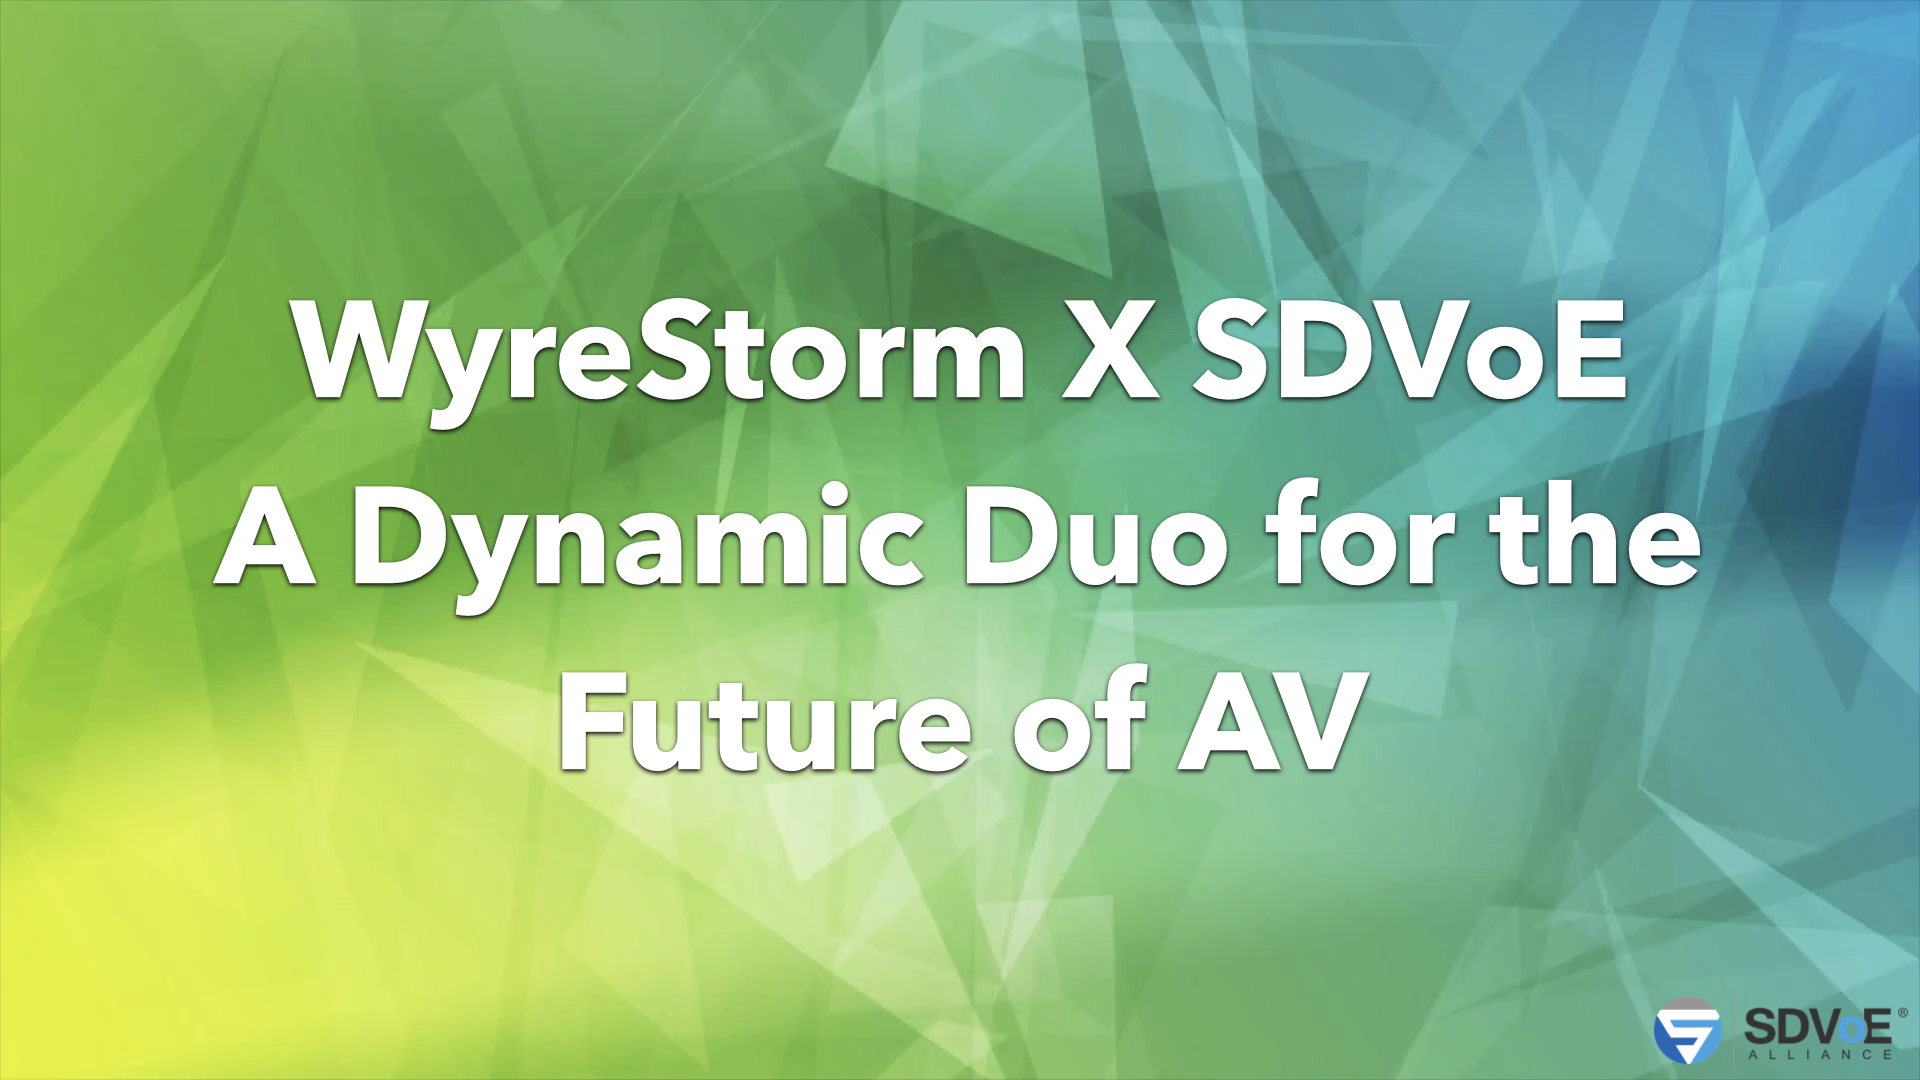 Wyrestorm x SDVoE, A Dynamic Duo for the Future of AV